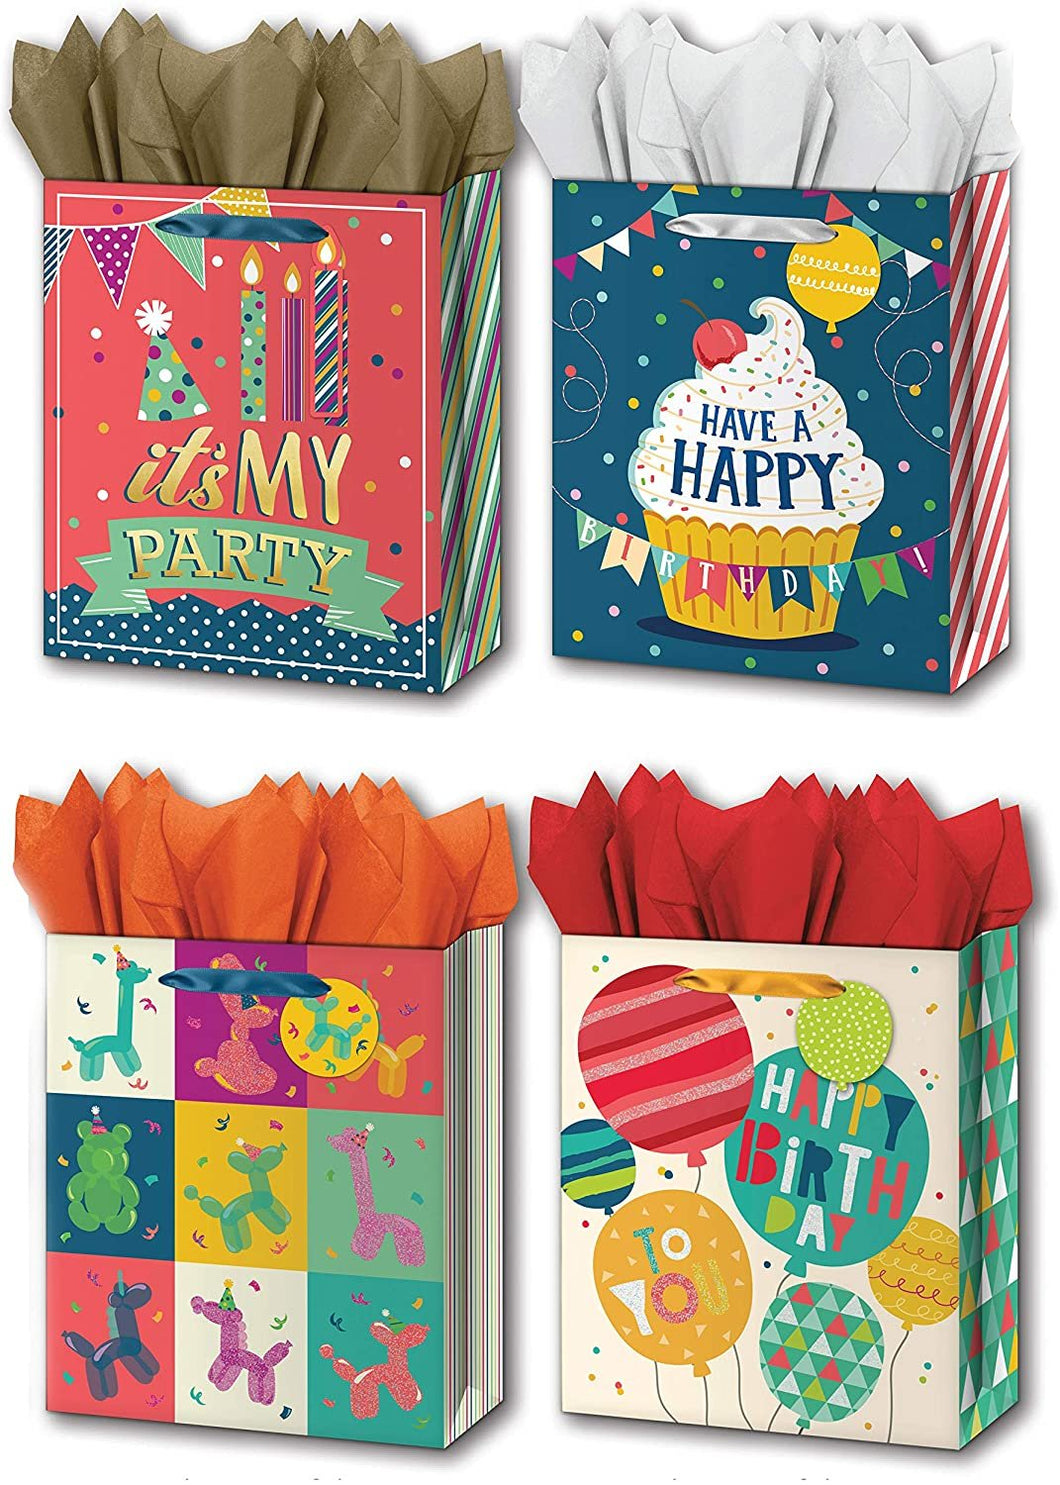 B-THERE Bundle of 4 Large 10” x 12” x 5” Gift Bags with Tags and Tissue for Men, Women for Birthday Party or Special Occasion